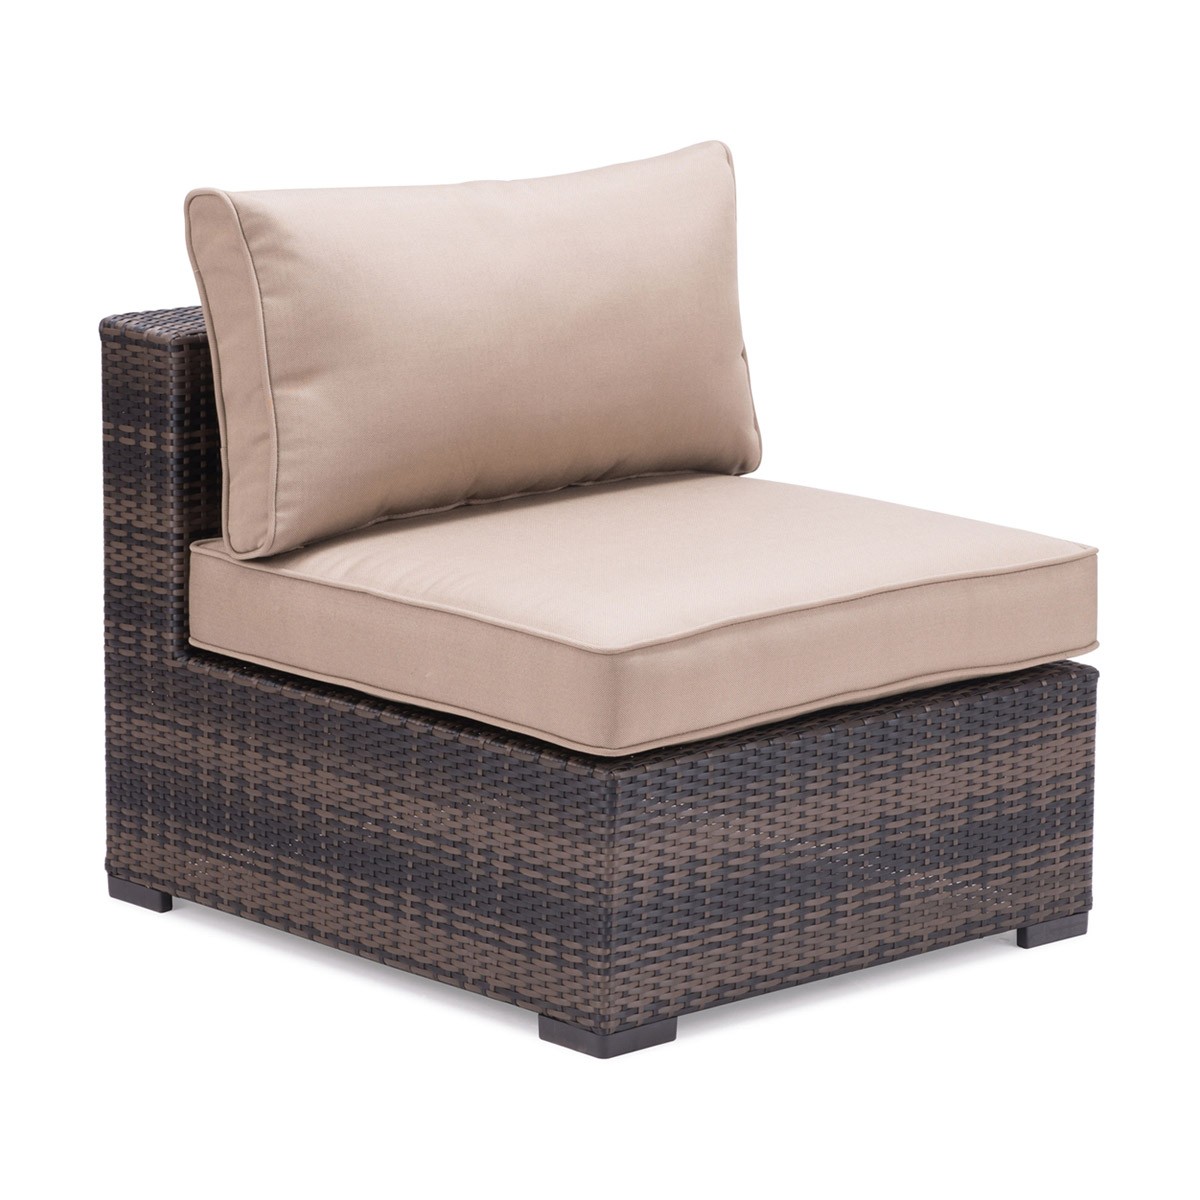 Zuo Modern Bocagrande Middle Chair - Brown